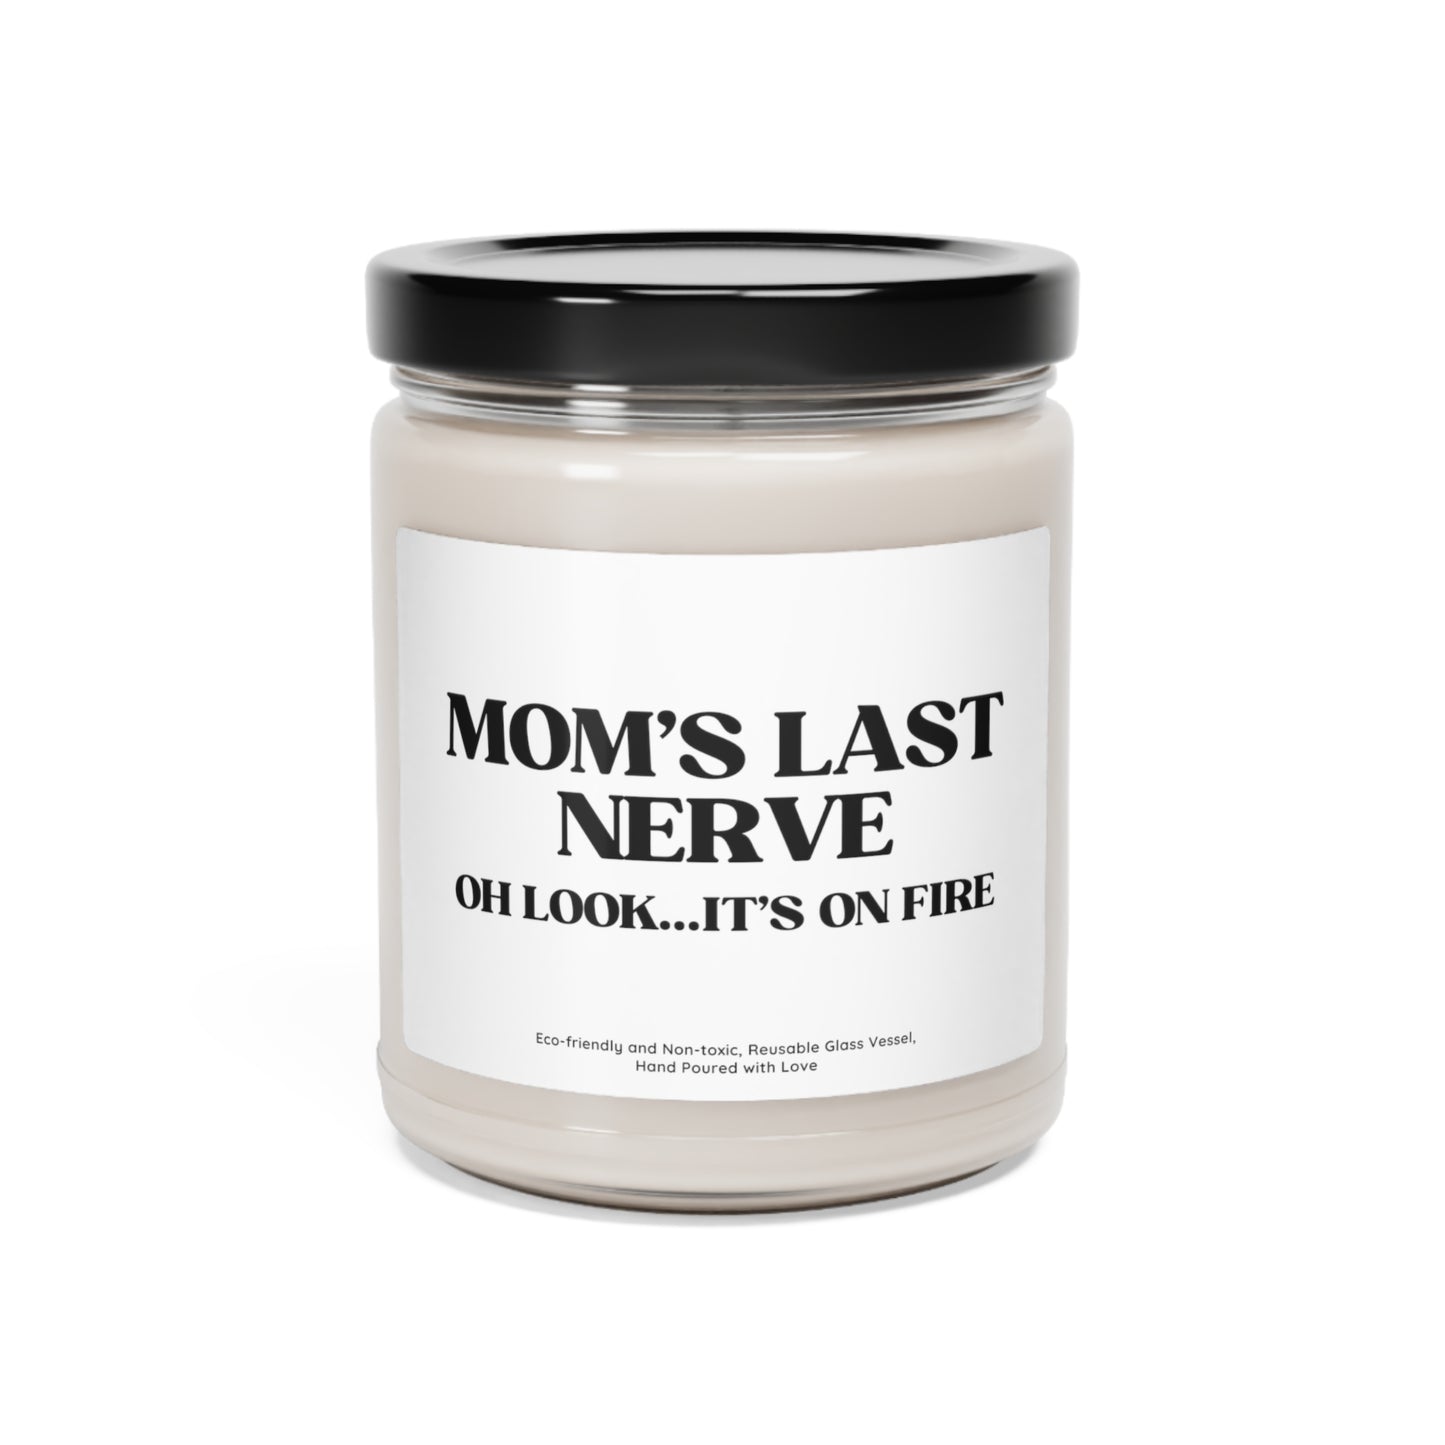 6.Scented Soy Candle, 9oz